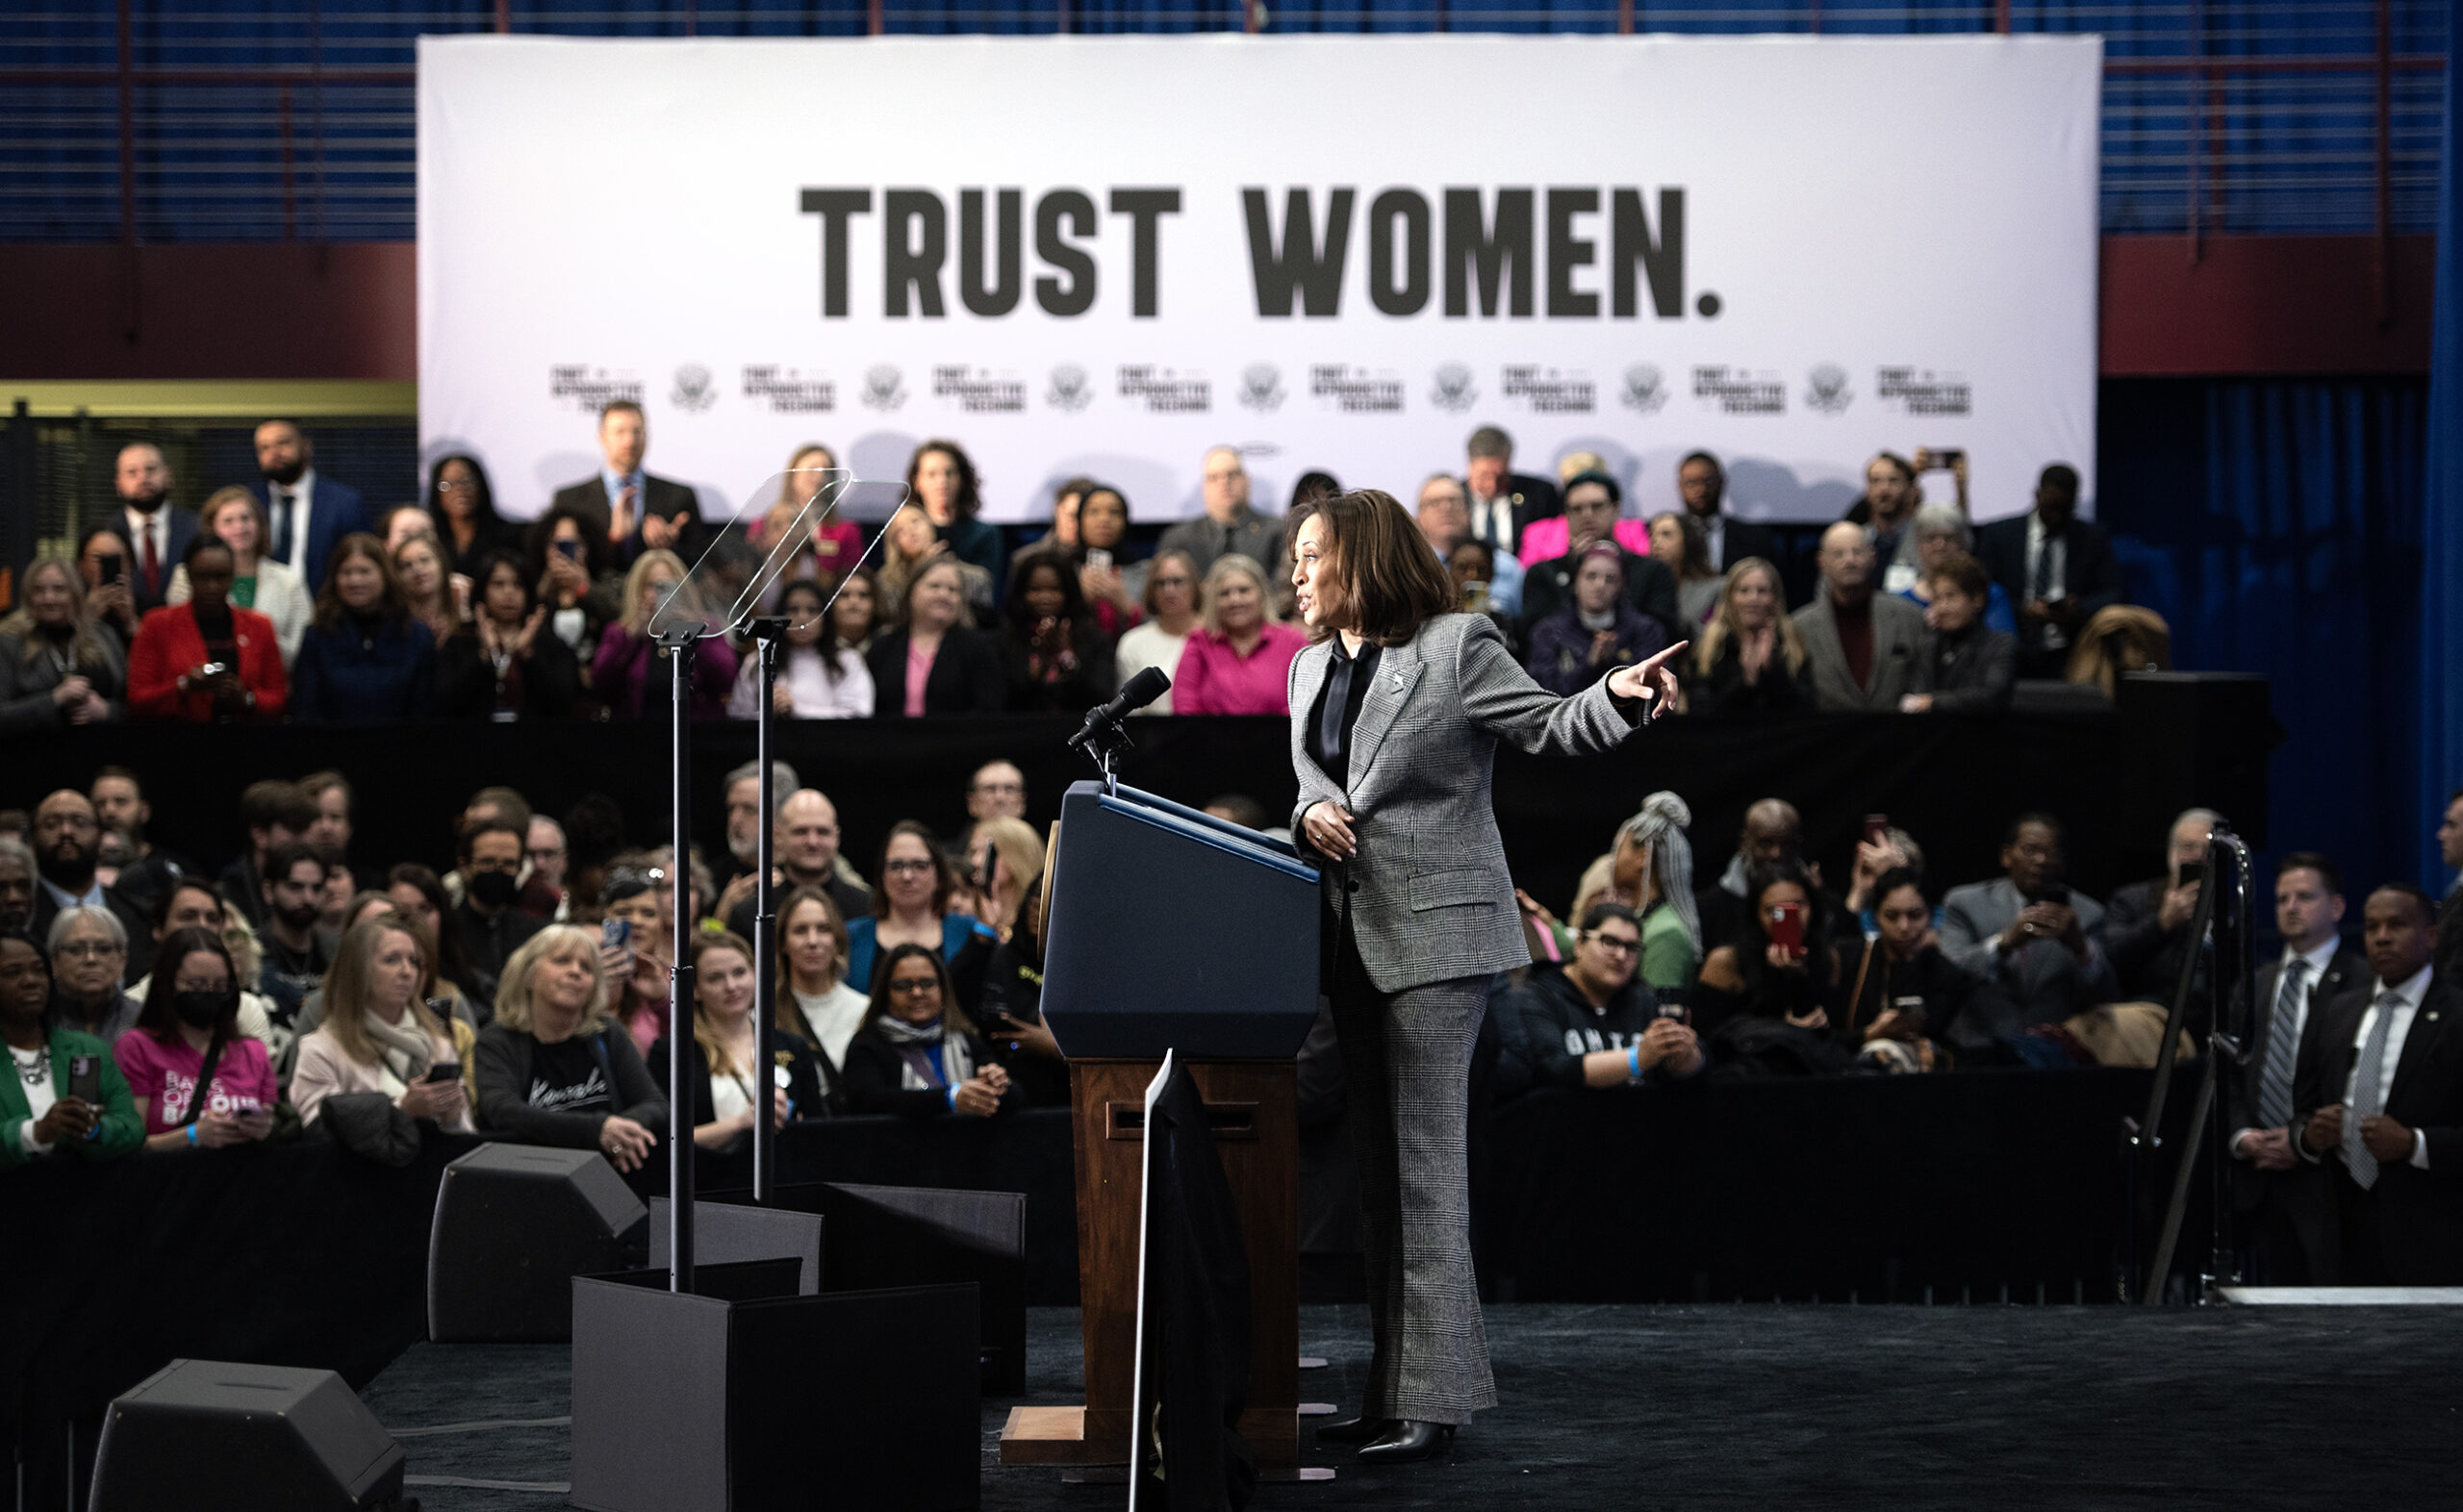 Vice President Kamala Harris voices support for abortion access at Wisconsin visit